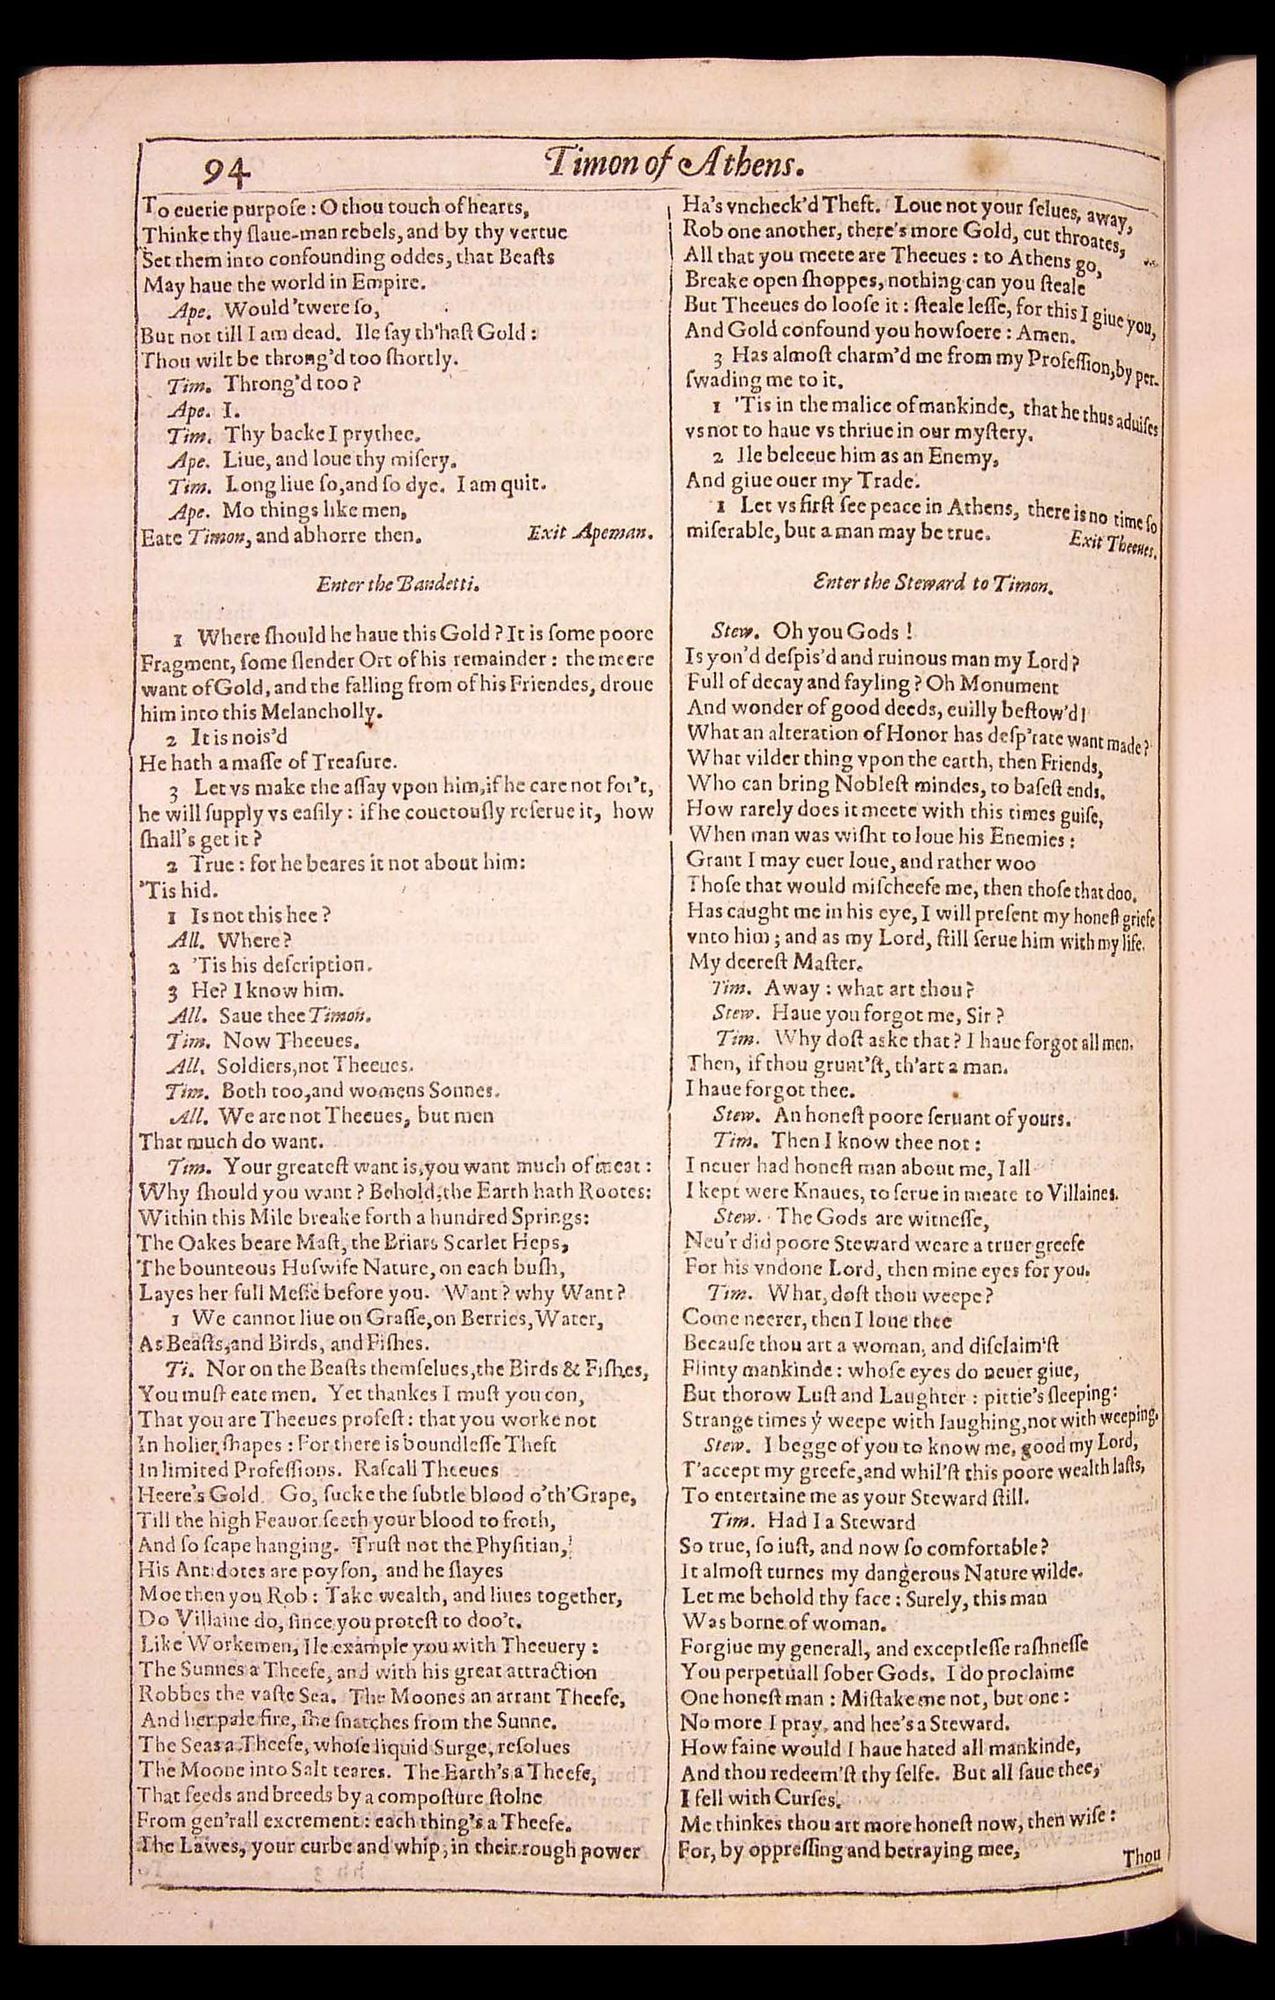 Image of page 710